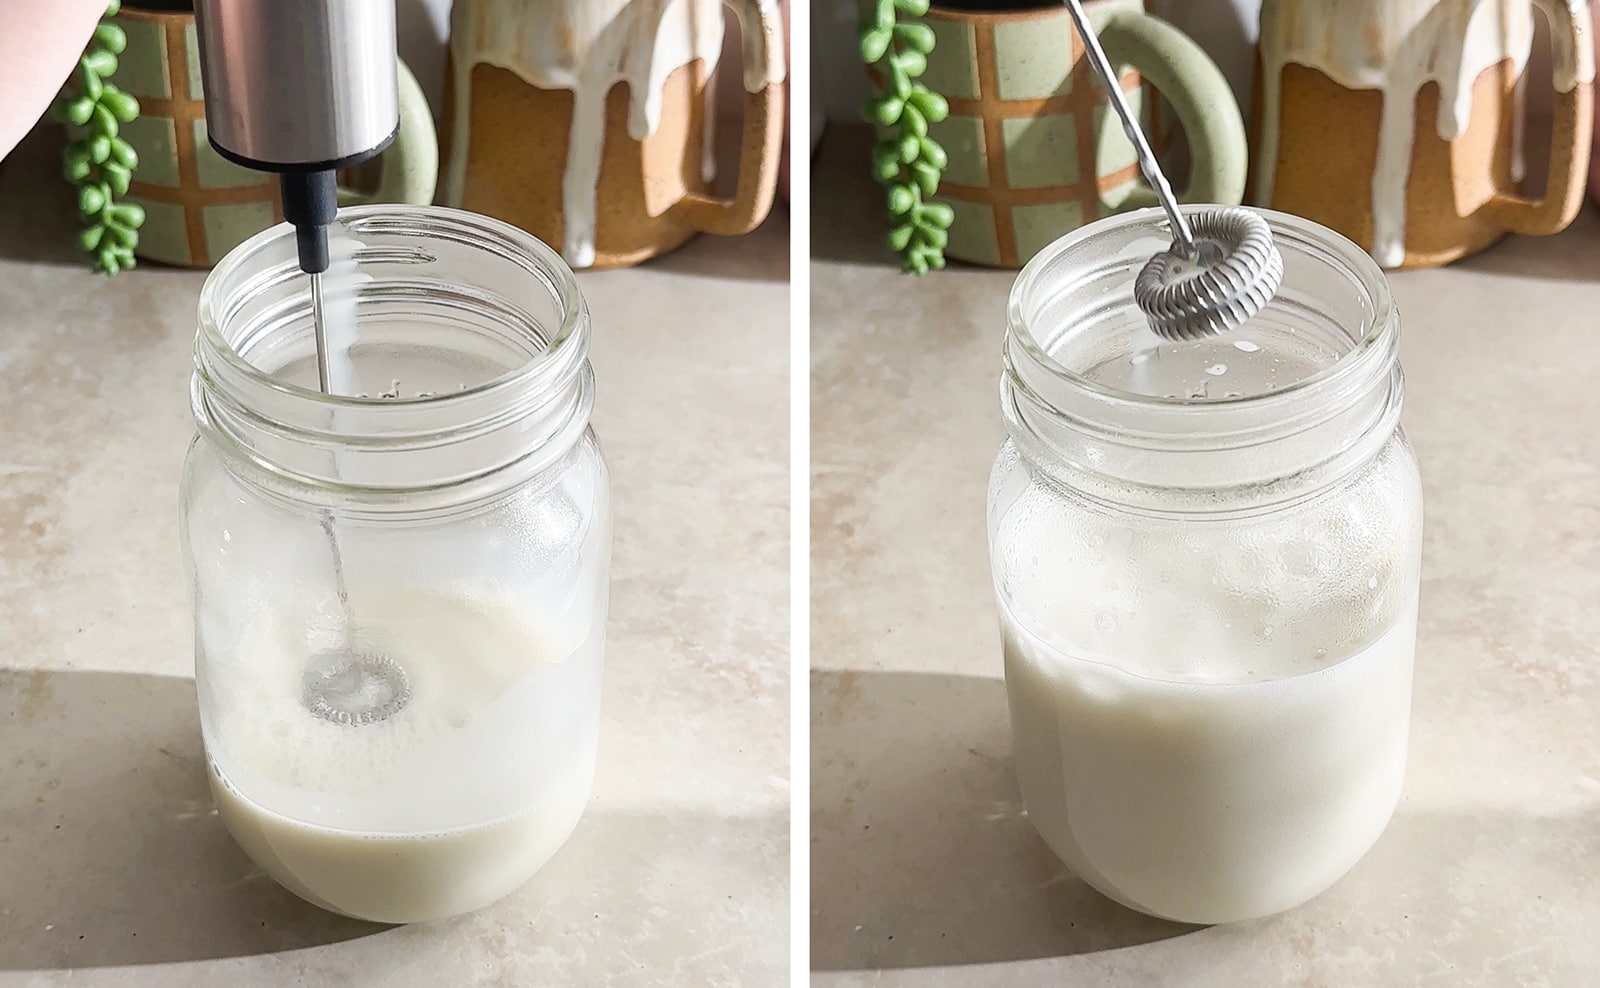 Left to right: handheld frother in jar of milk, milk at a higher volume after frothing.